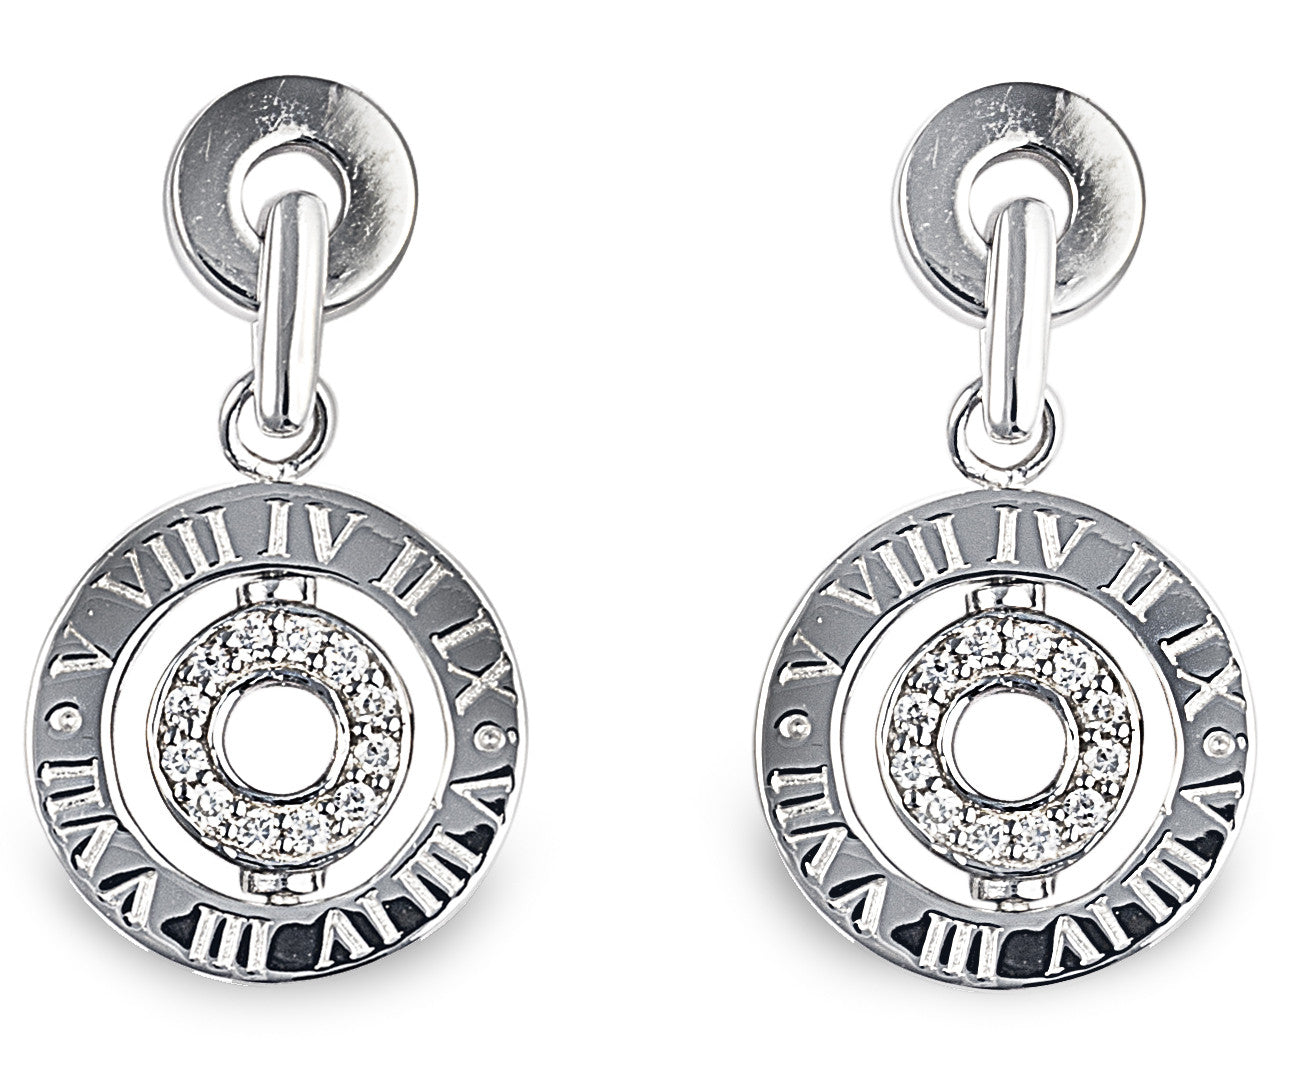 Juicy Drop Earrings in 925 Sterling Silver with Cubic Zirconia Stones and Roman Numerals. Worldwide Shipping.